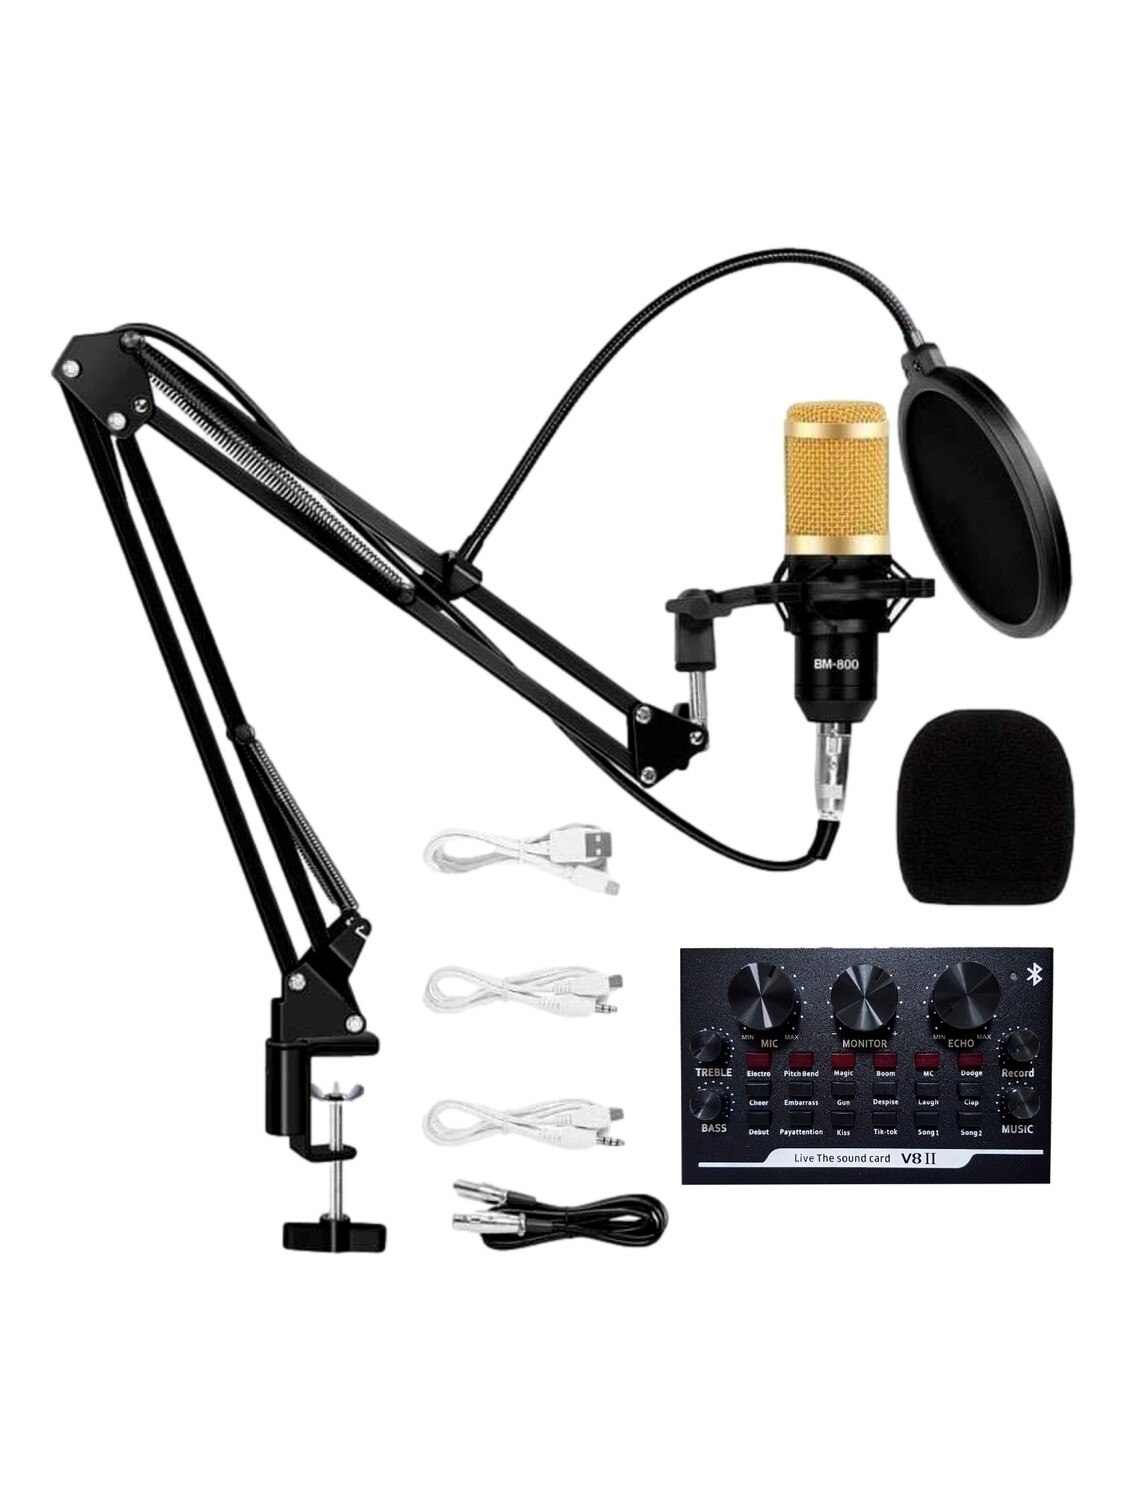 Condenser Microphone With Live and other accessories Complete set